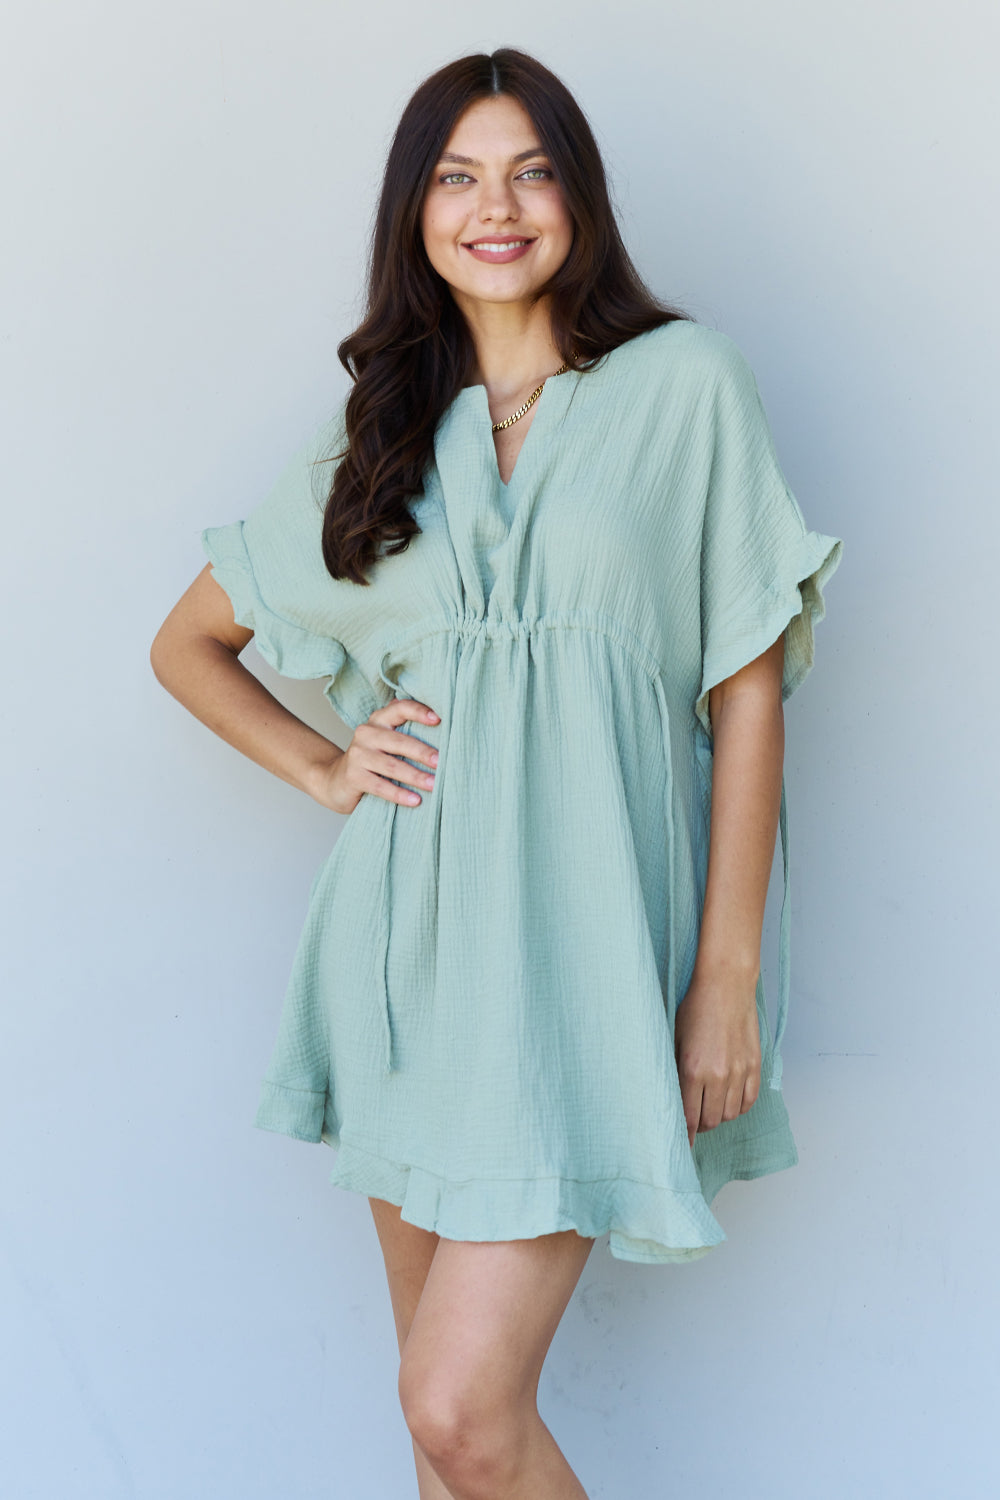 Ninexis Out Of Time Full Size Ruffle Hem Dress with Drawstring Waistband in Light Sage - Mulberry Skies